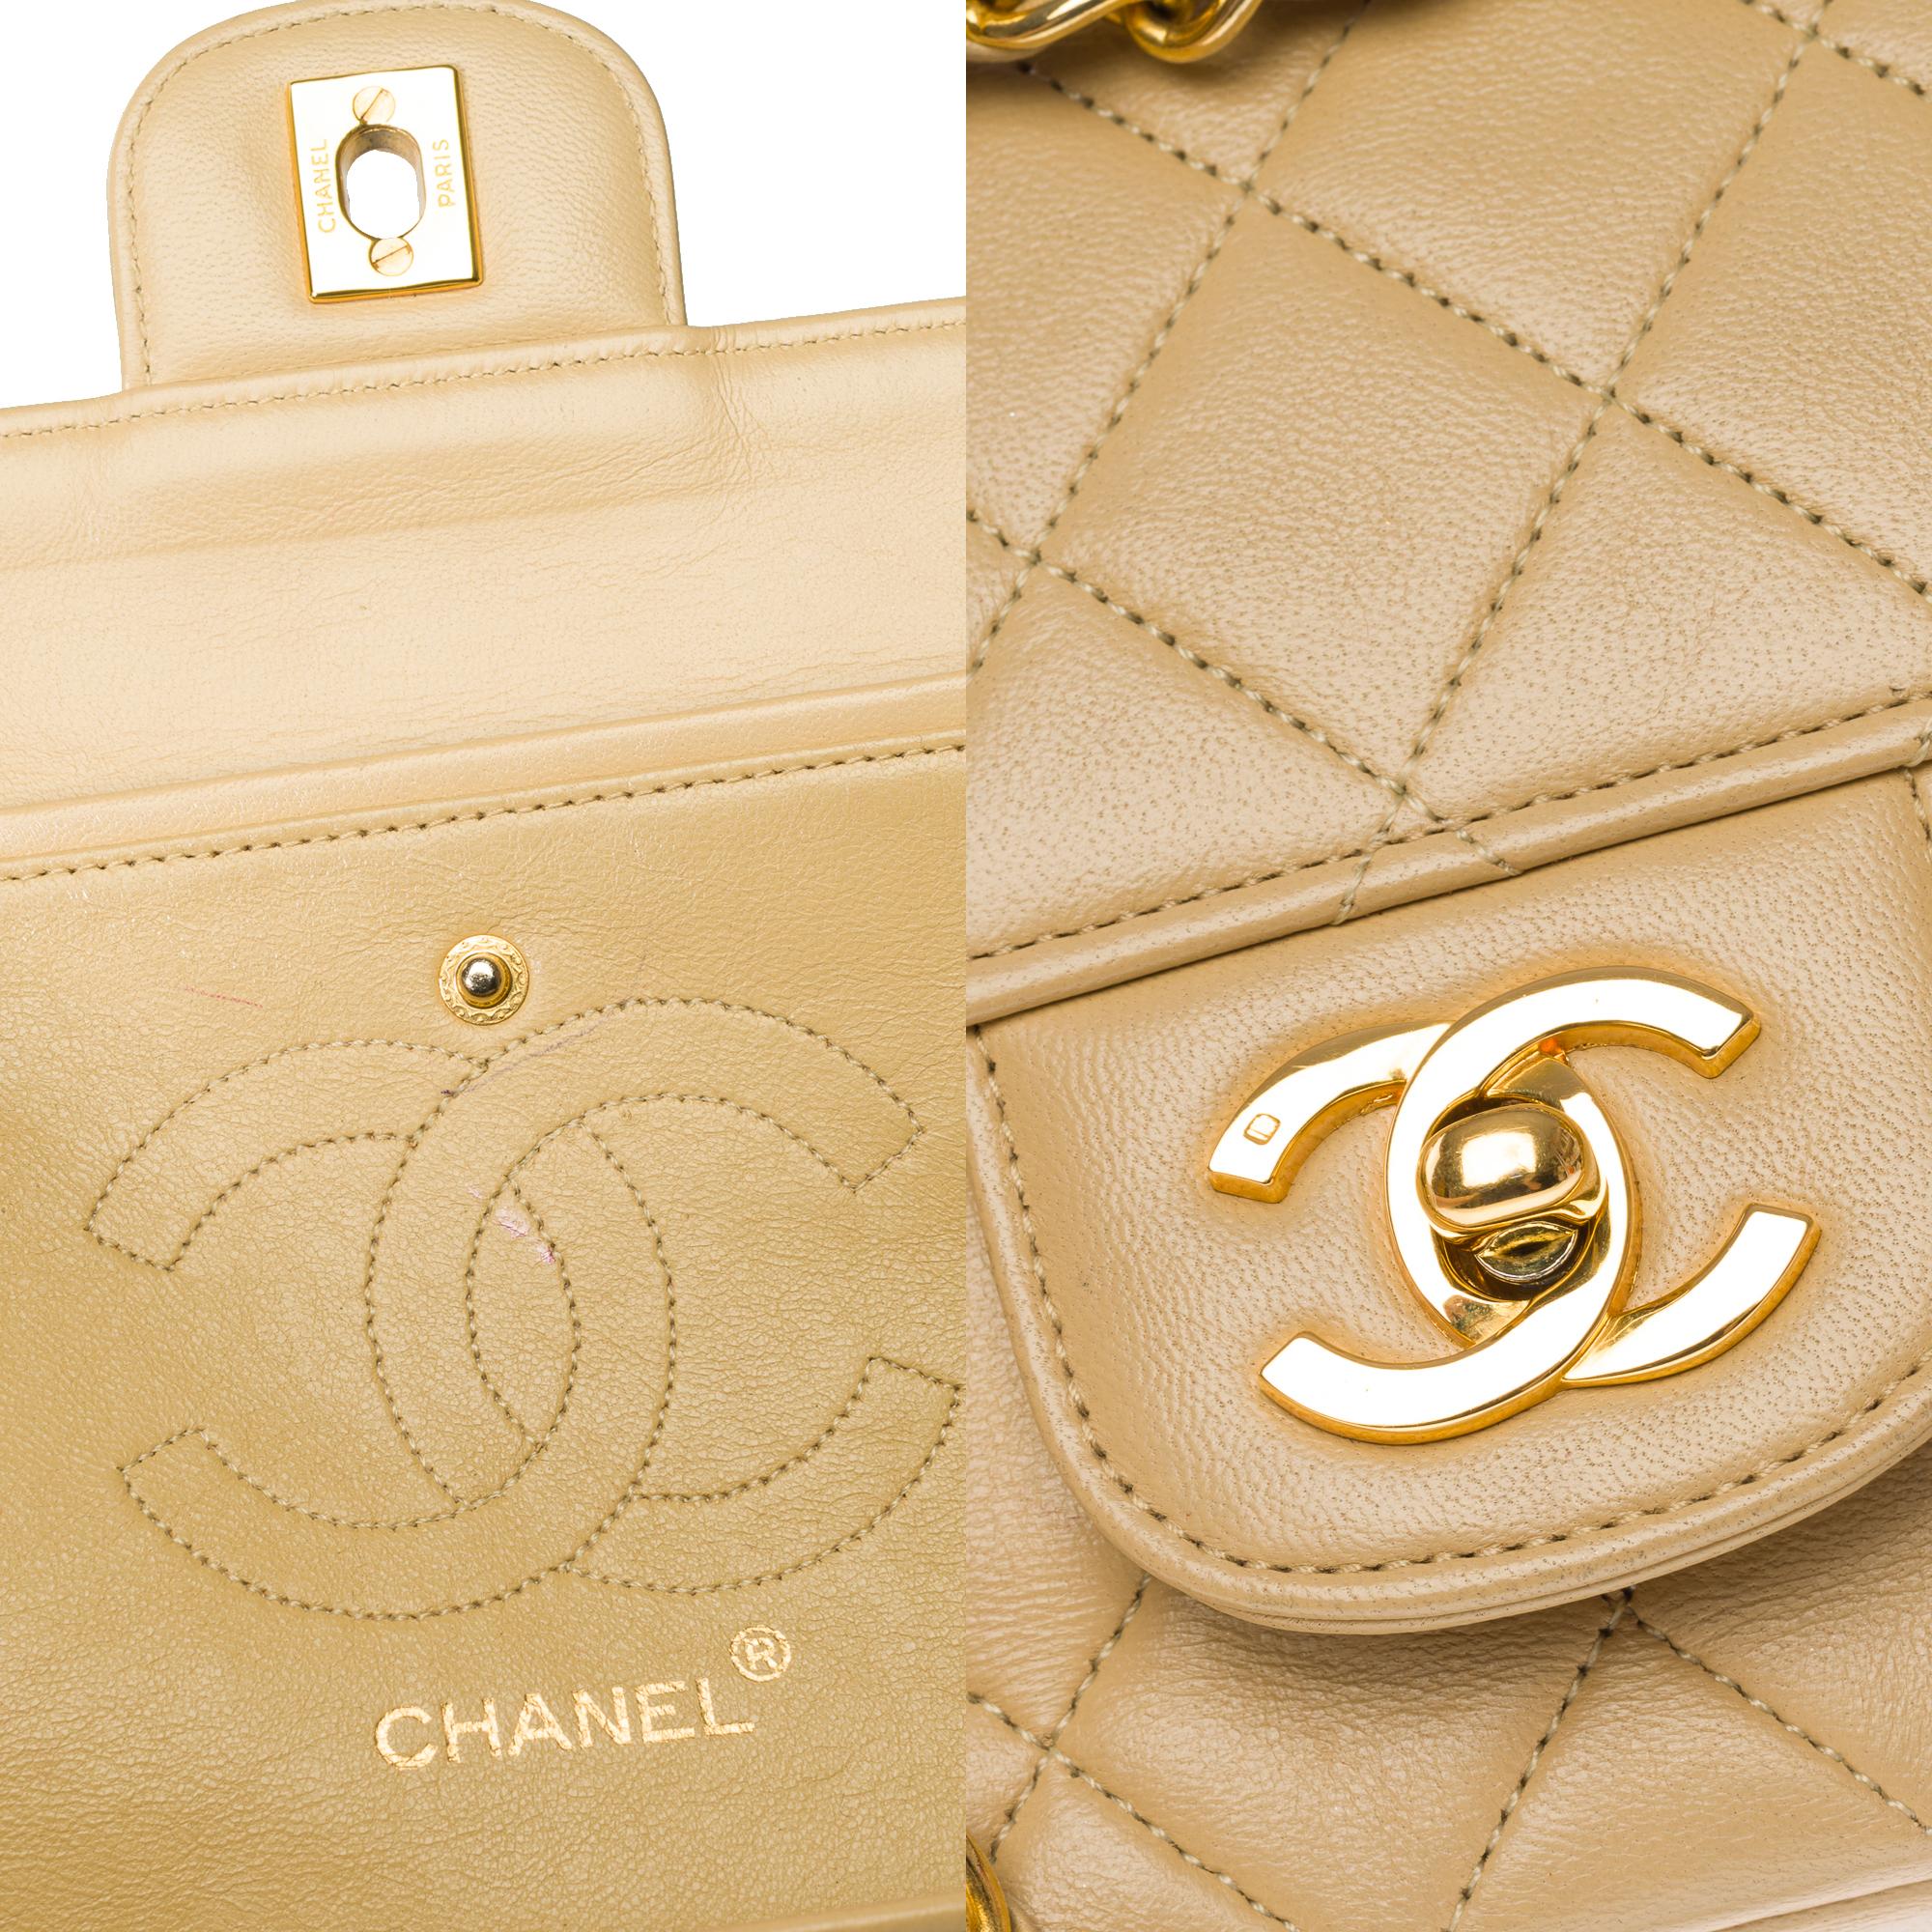 Chanel Timeless double flap shoulder bag in beige quilted lambskin leather, GHW For Sale 2